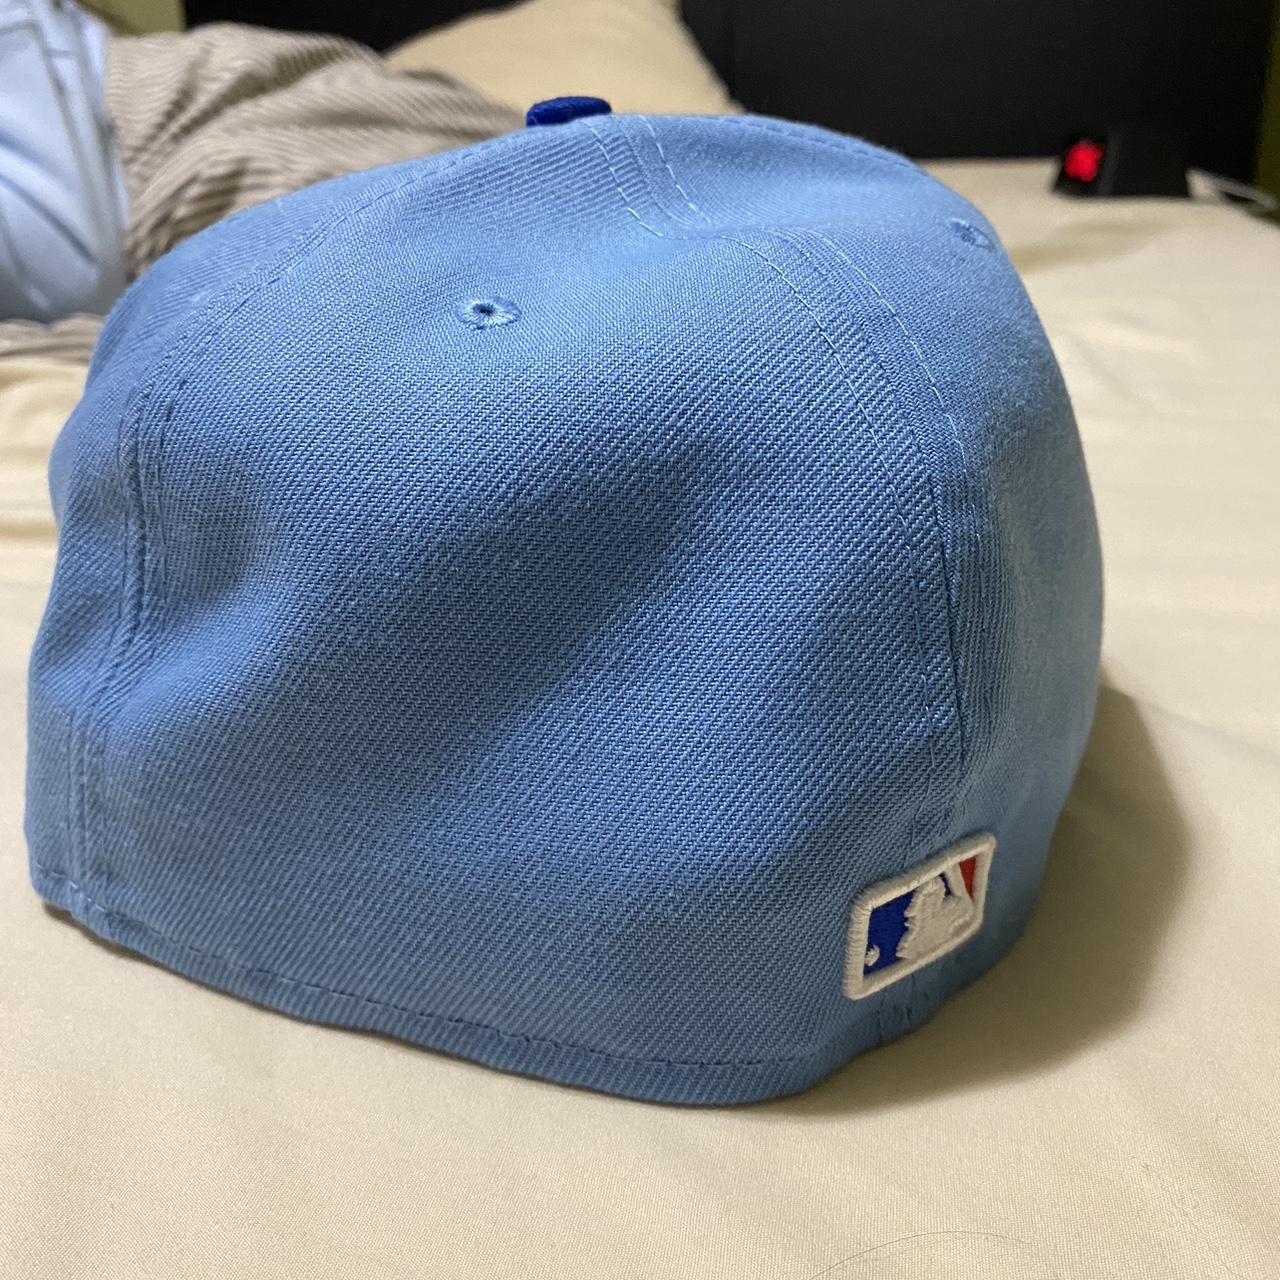 MLB Texas Rangers fitted hat Size 7 3/4 no rips , - Depop